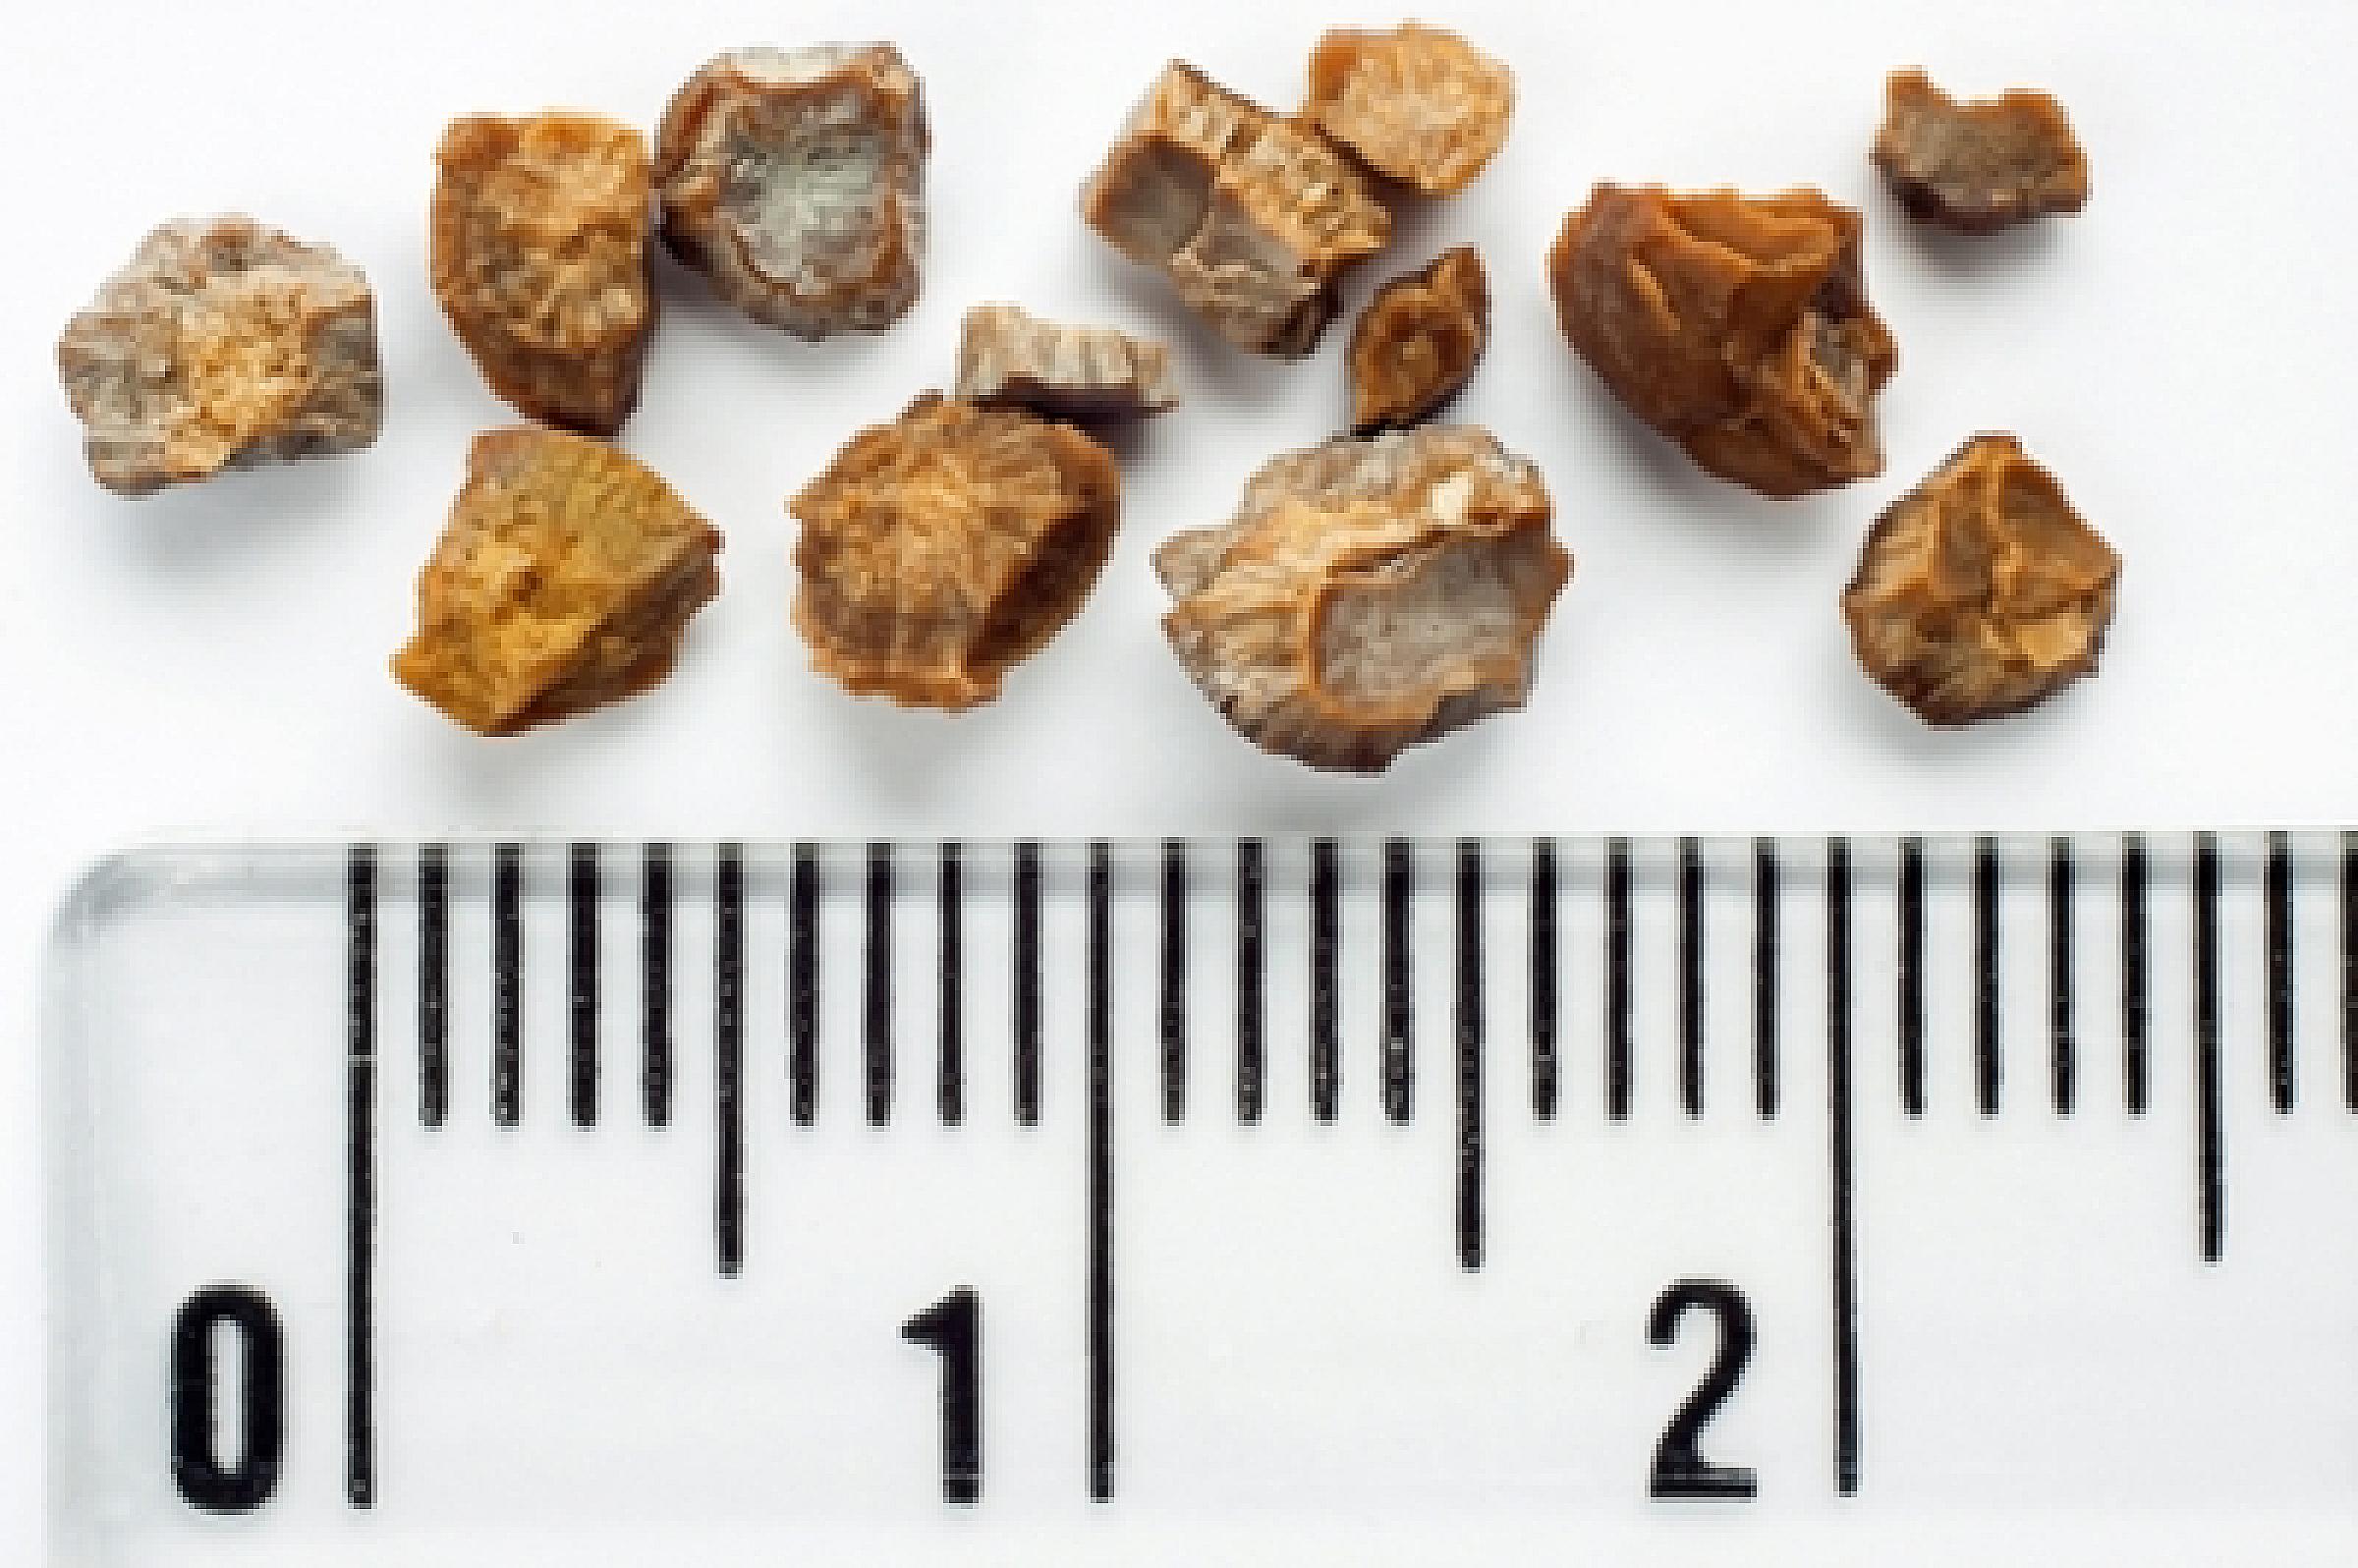 Kidney stones and ruler